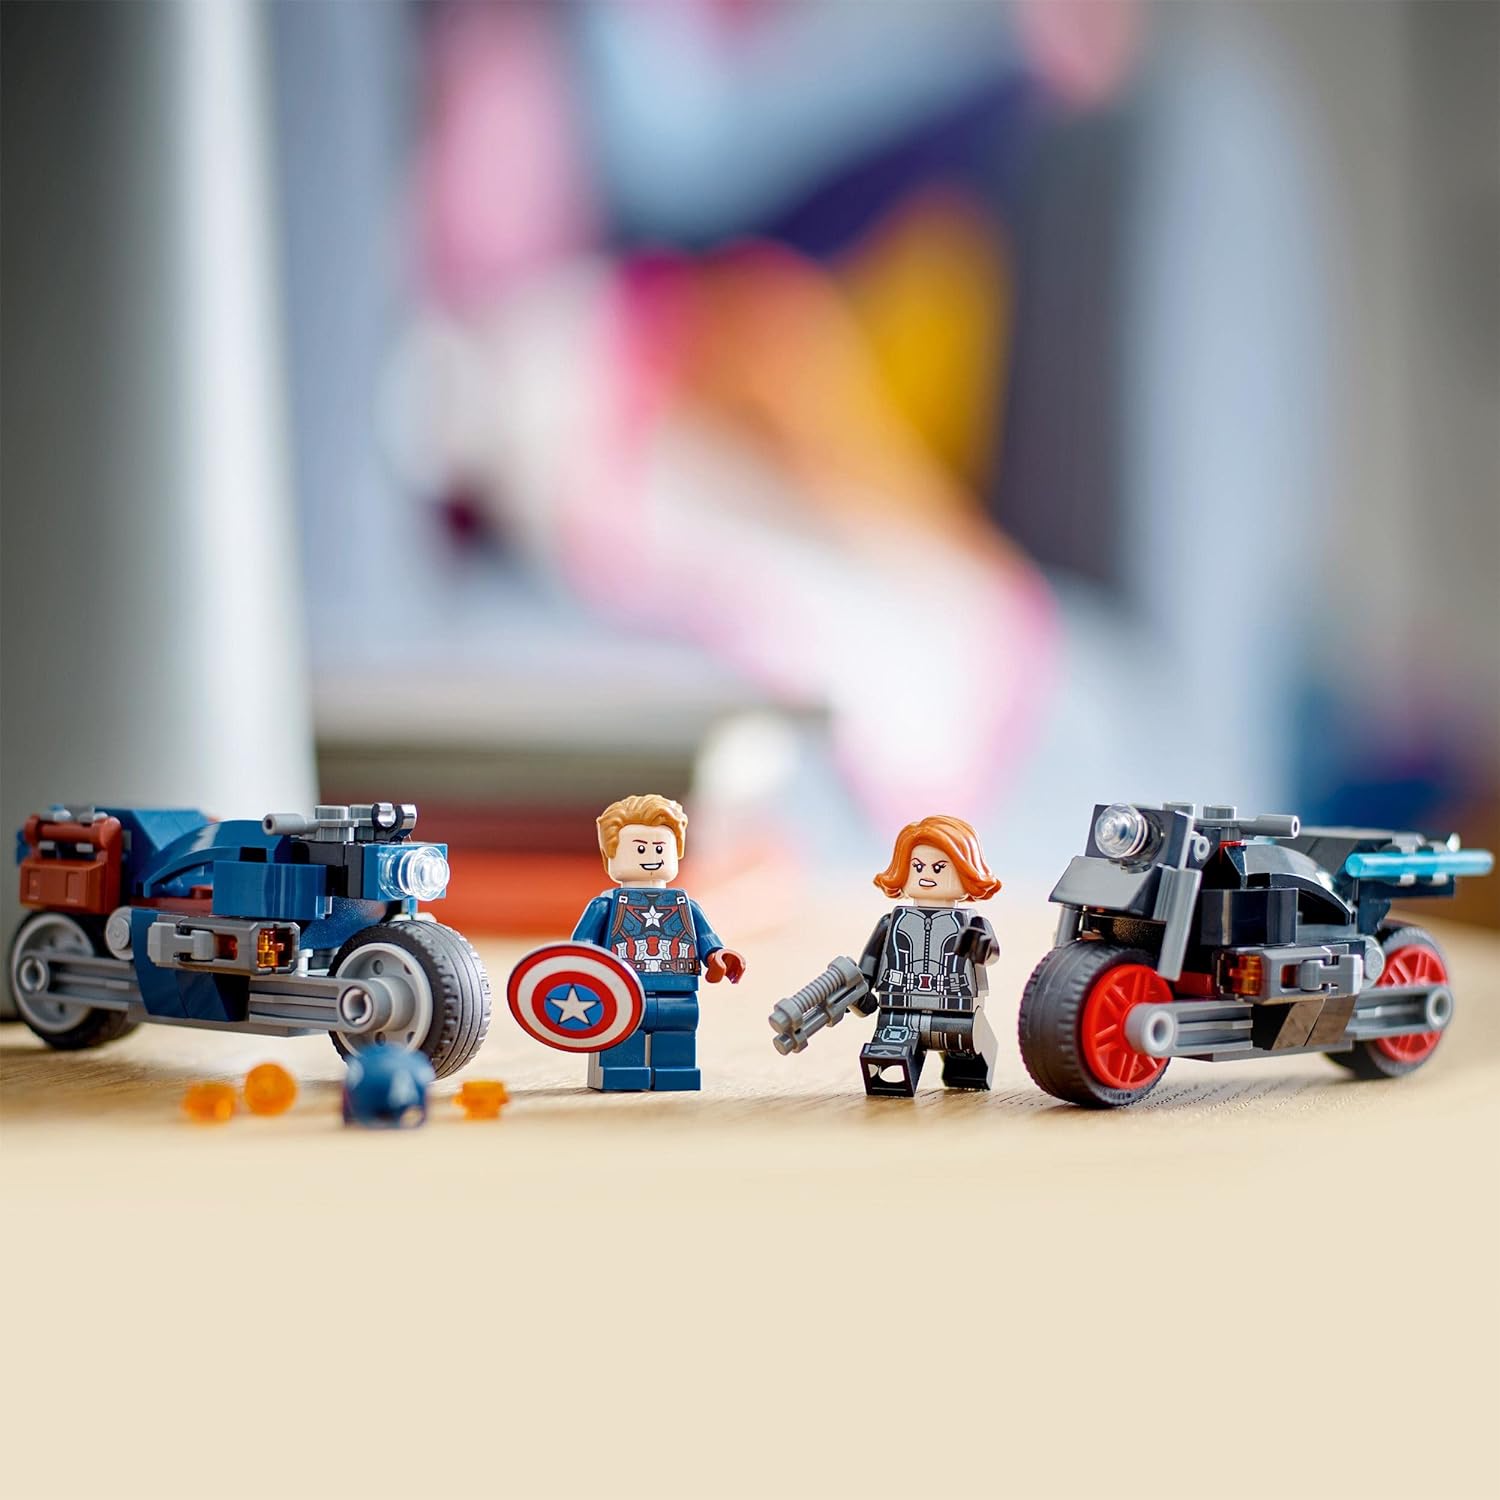 LEGO Marvel Black Widow & Captain America Motorcycles Building Kit for Ages 6+